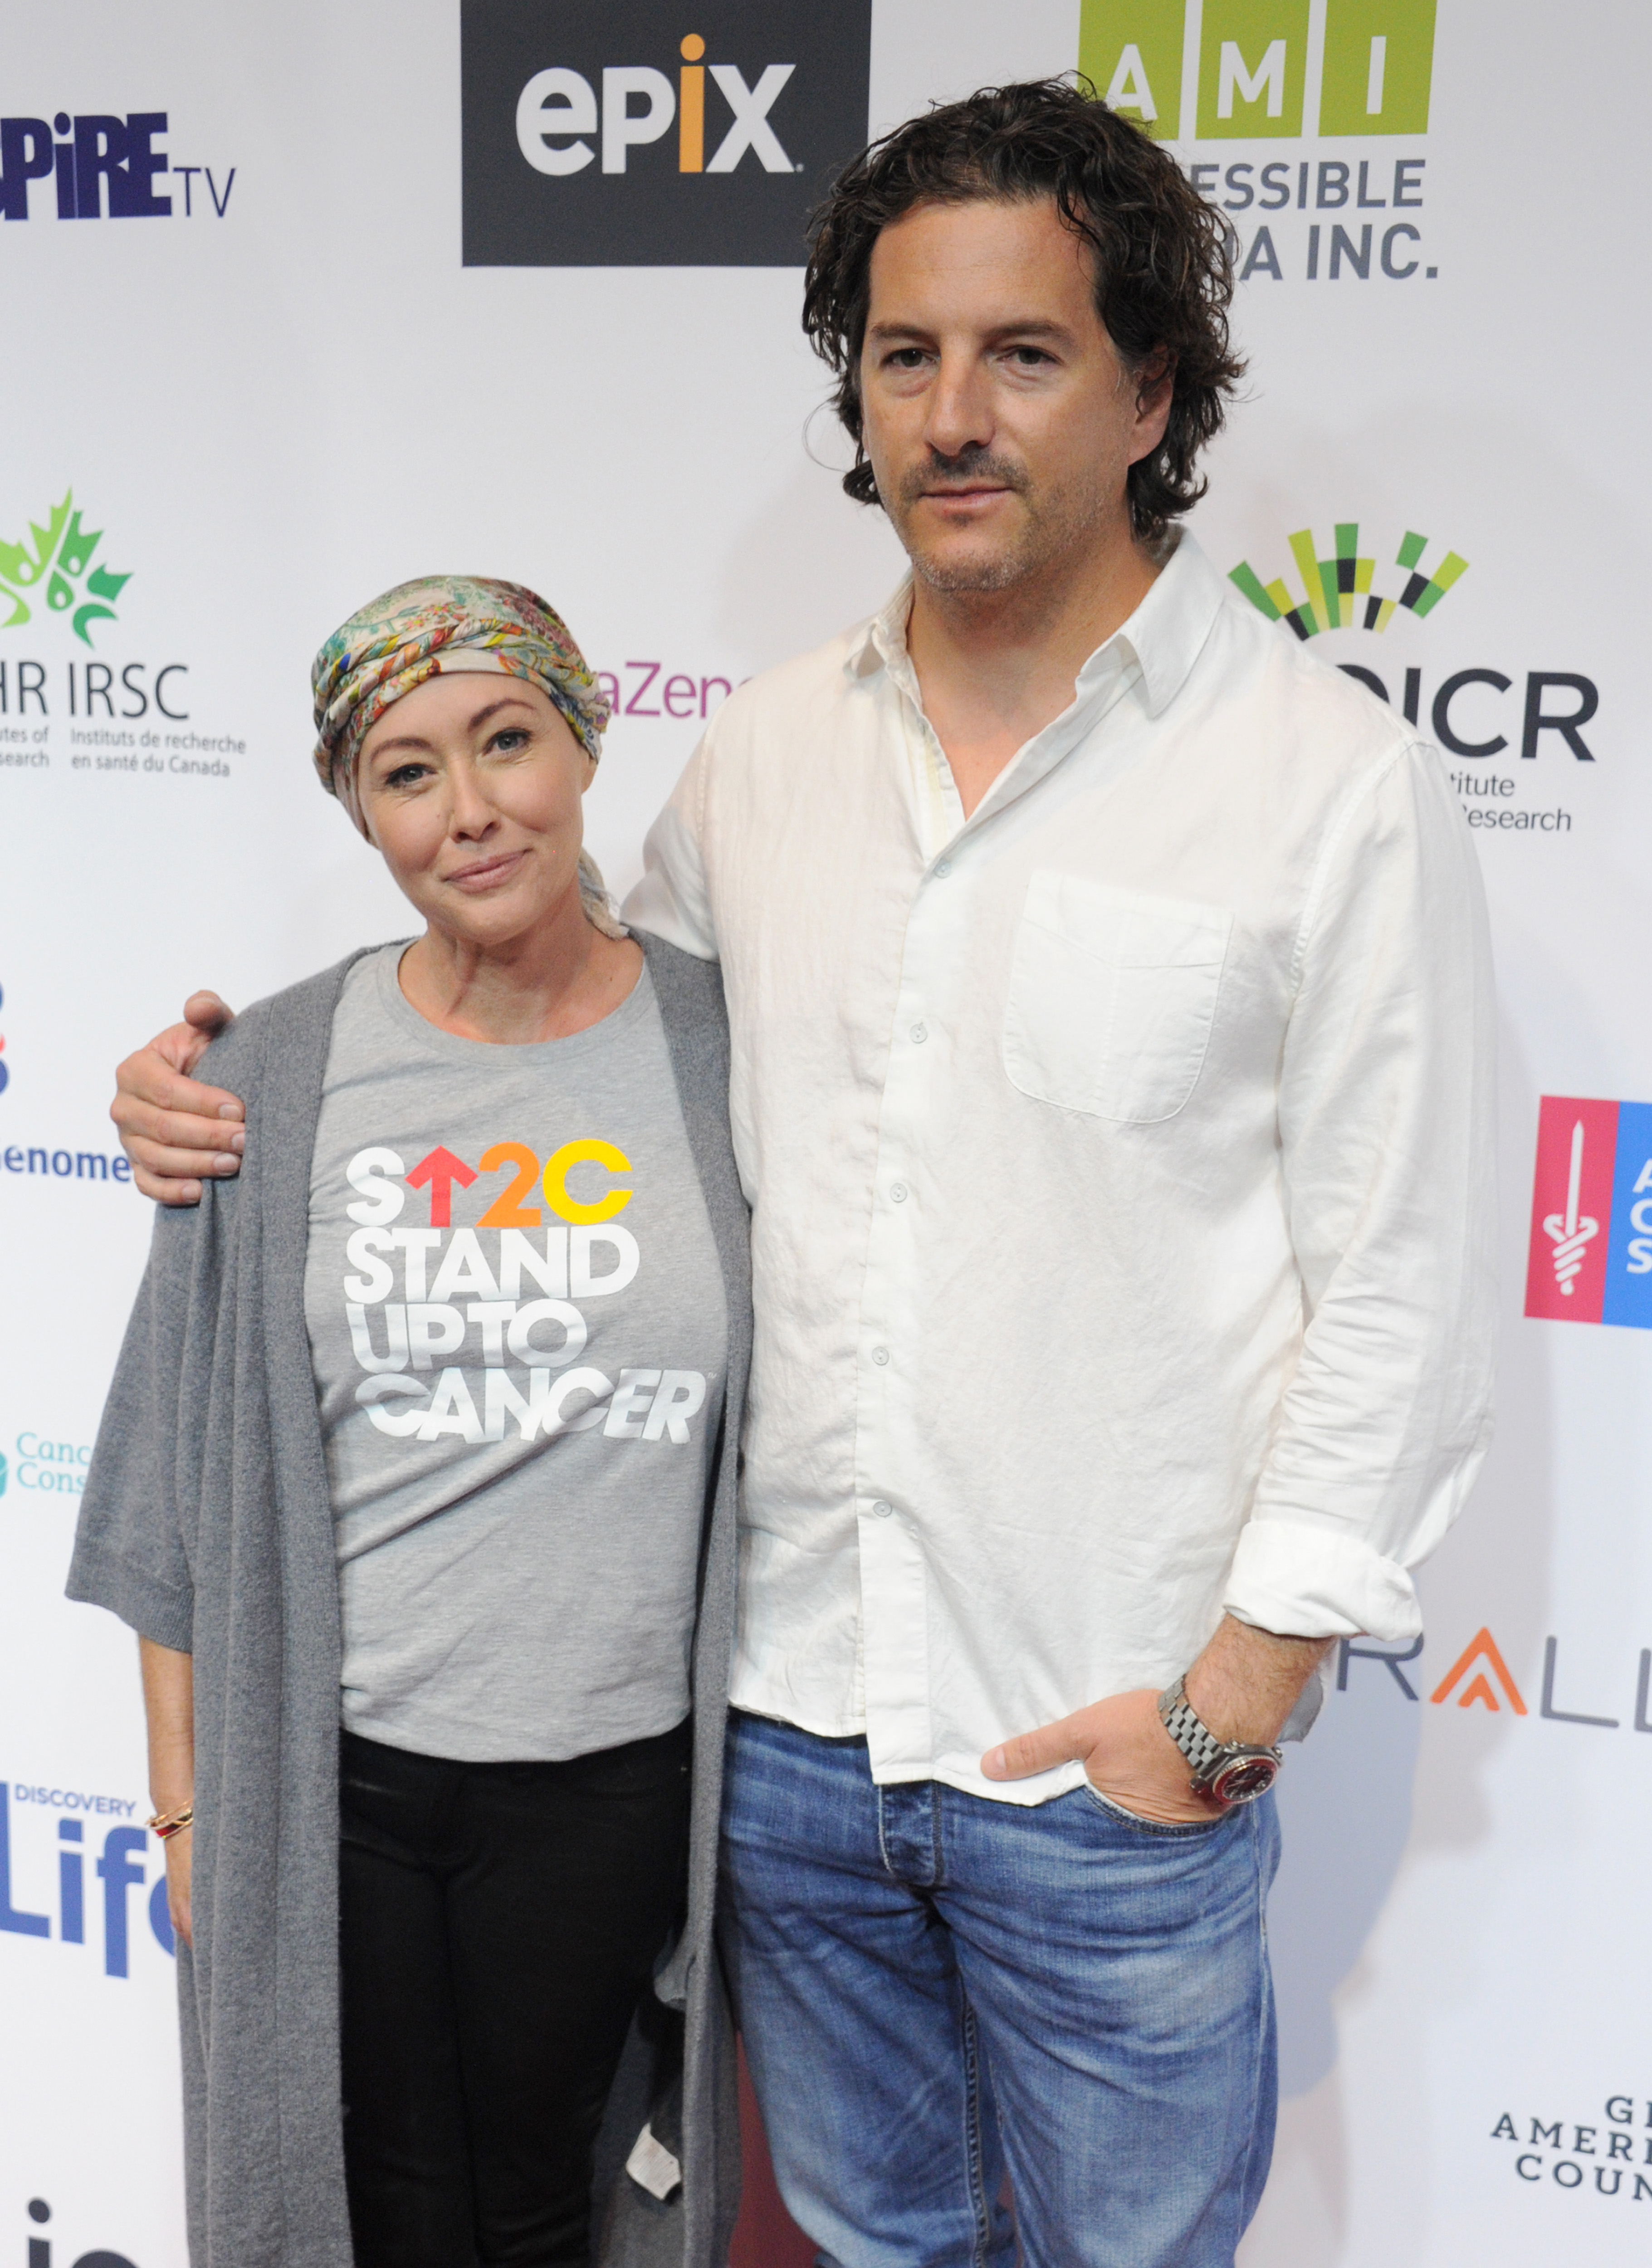 Shannen Doherty and Kurt Iswarienko attend Hollywood Unites for the 5th Biennial Stand Up To Cancer (SU2C), A Program of The Entertainment Industry Foundation (EIF) at Walt Disney Concert in Los Angeles, California Hall on September 9, 2016. | Source: Getty Images